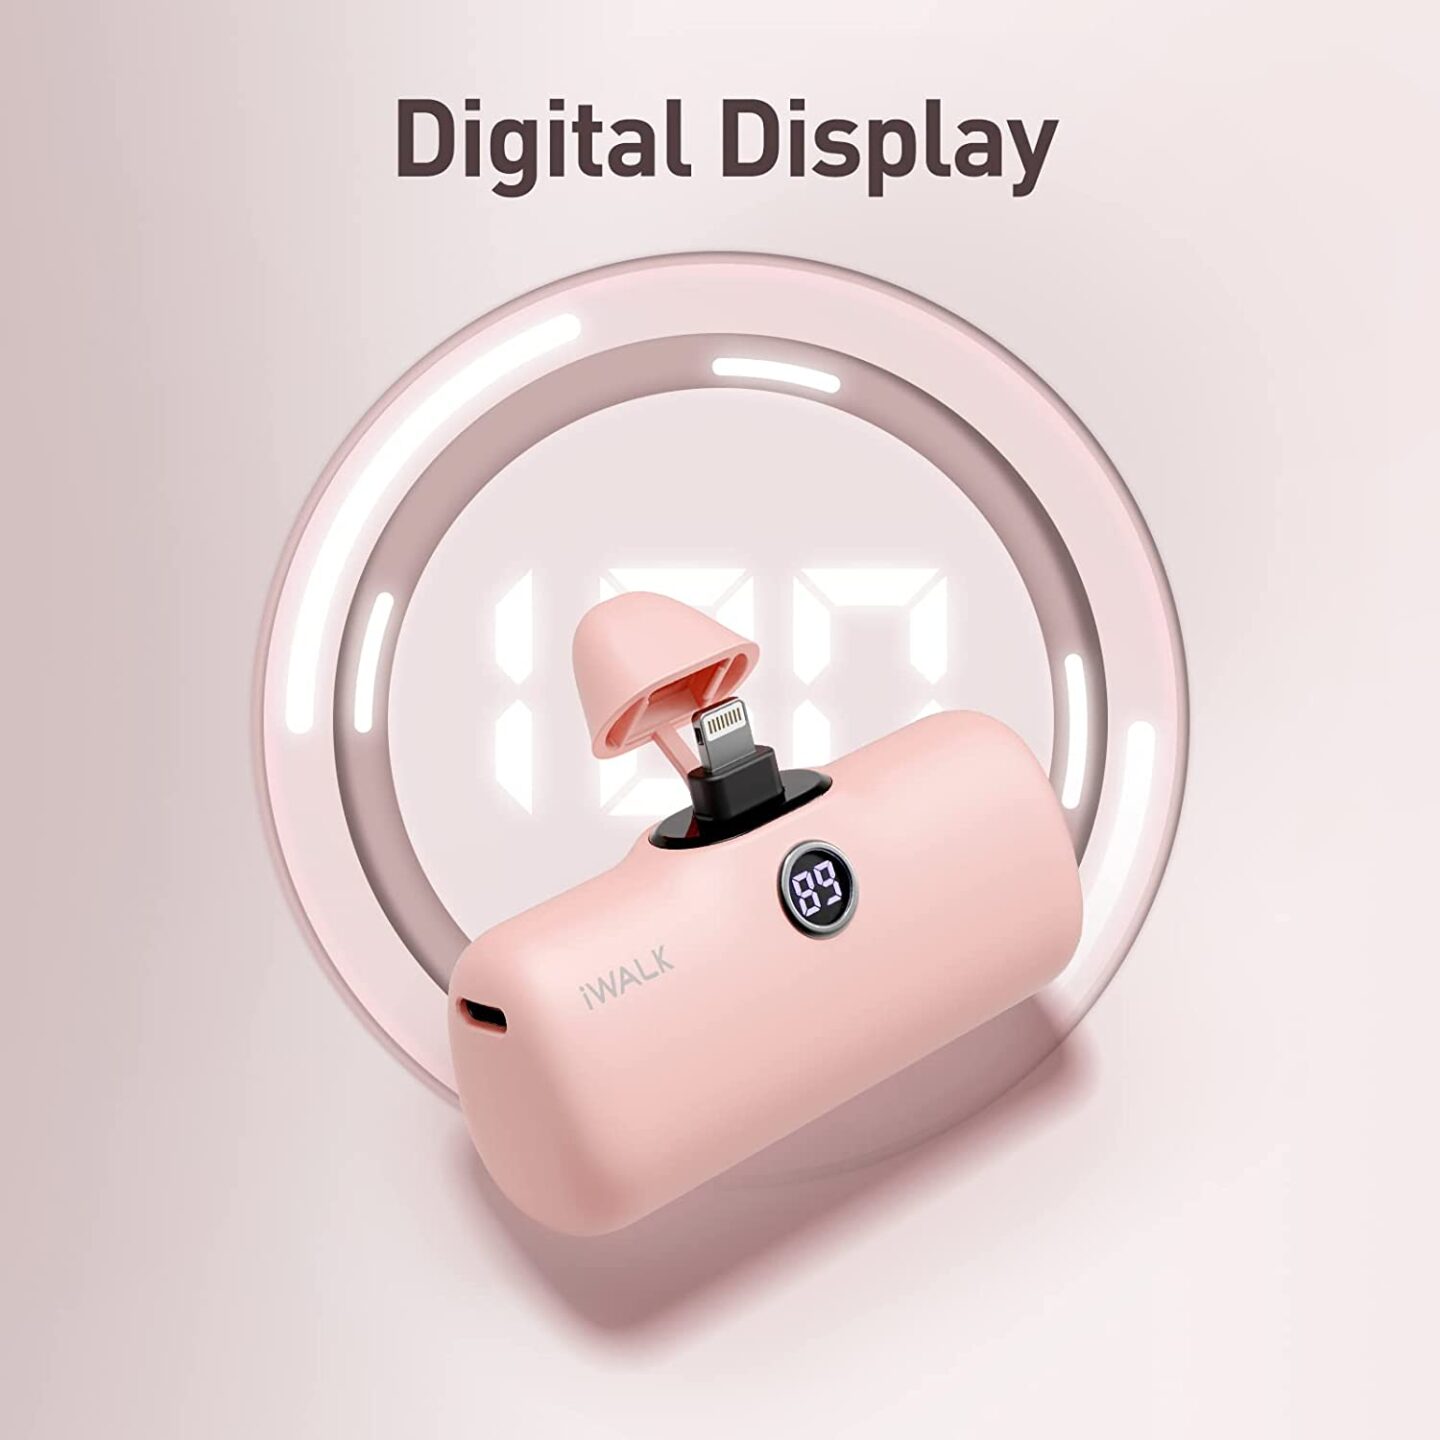 A small pink power bank with 89 on it's digital display